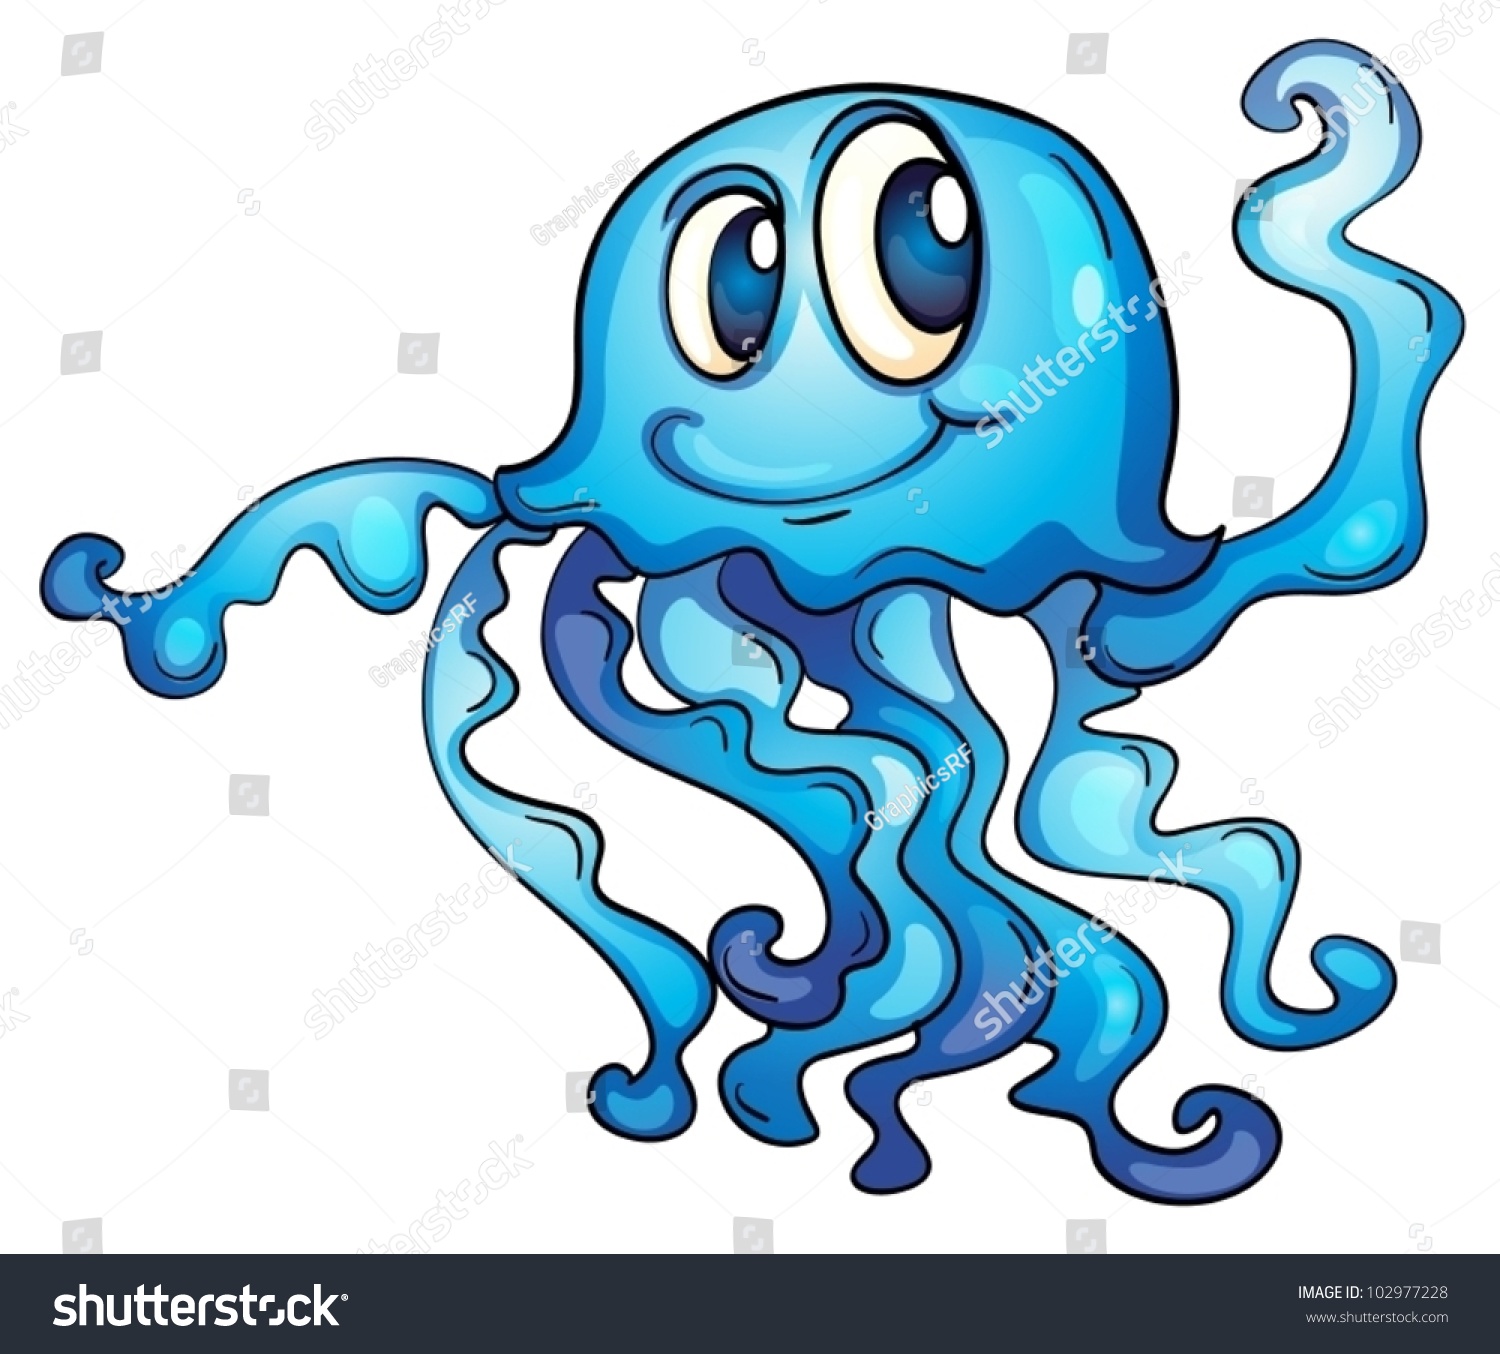 Illustration Of A Simple Jellyfish - 102977228 : Shutterstock